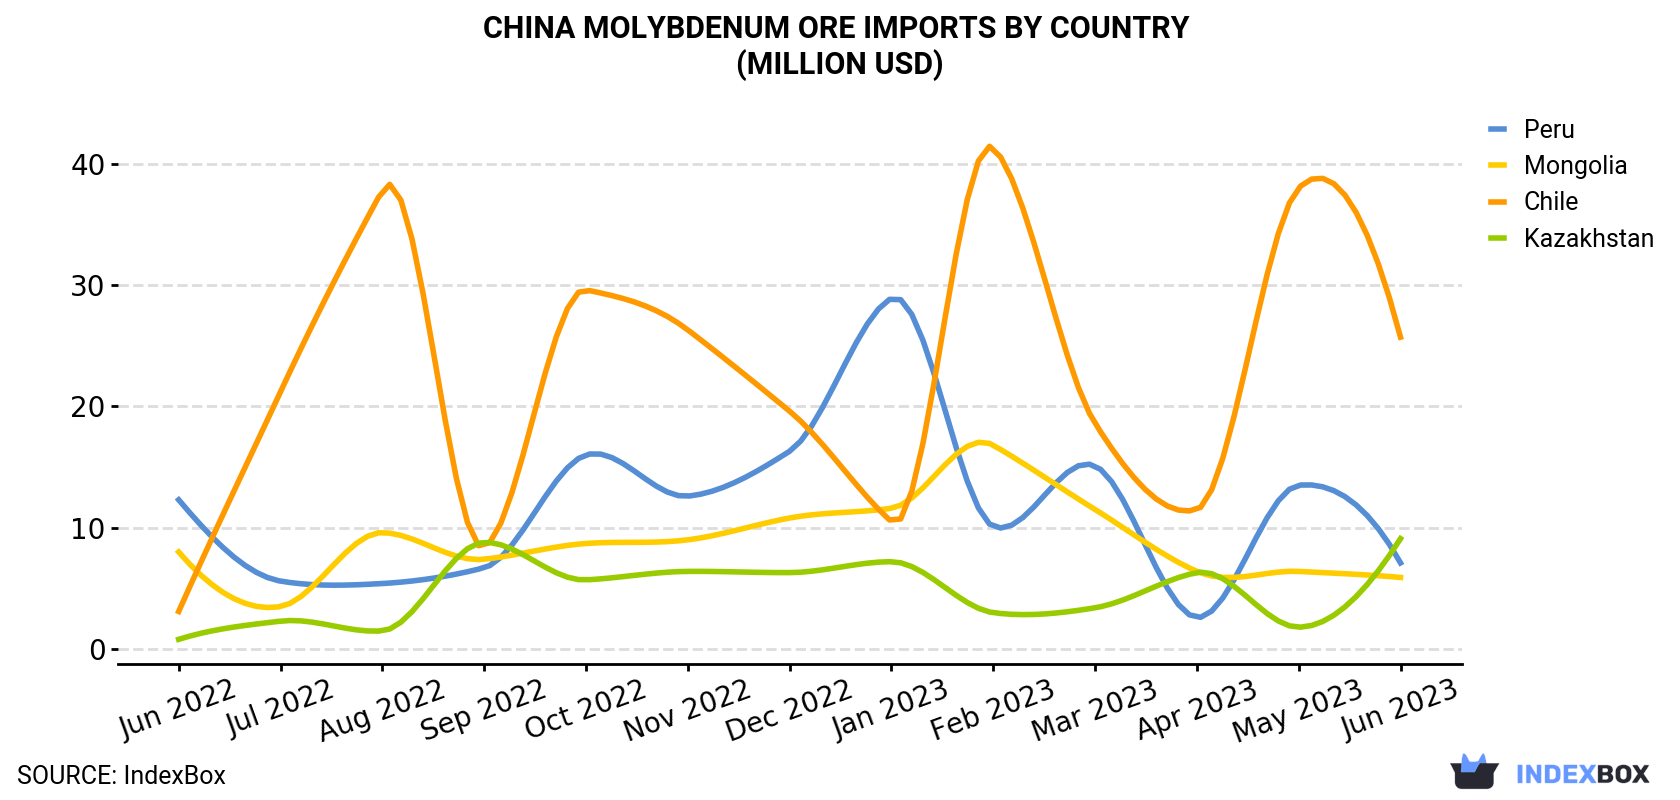 China Molybdenum Ore Imports By Country (Million USD)